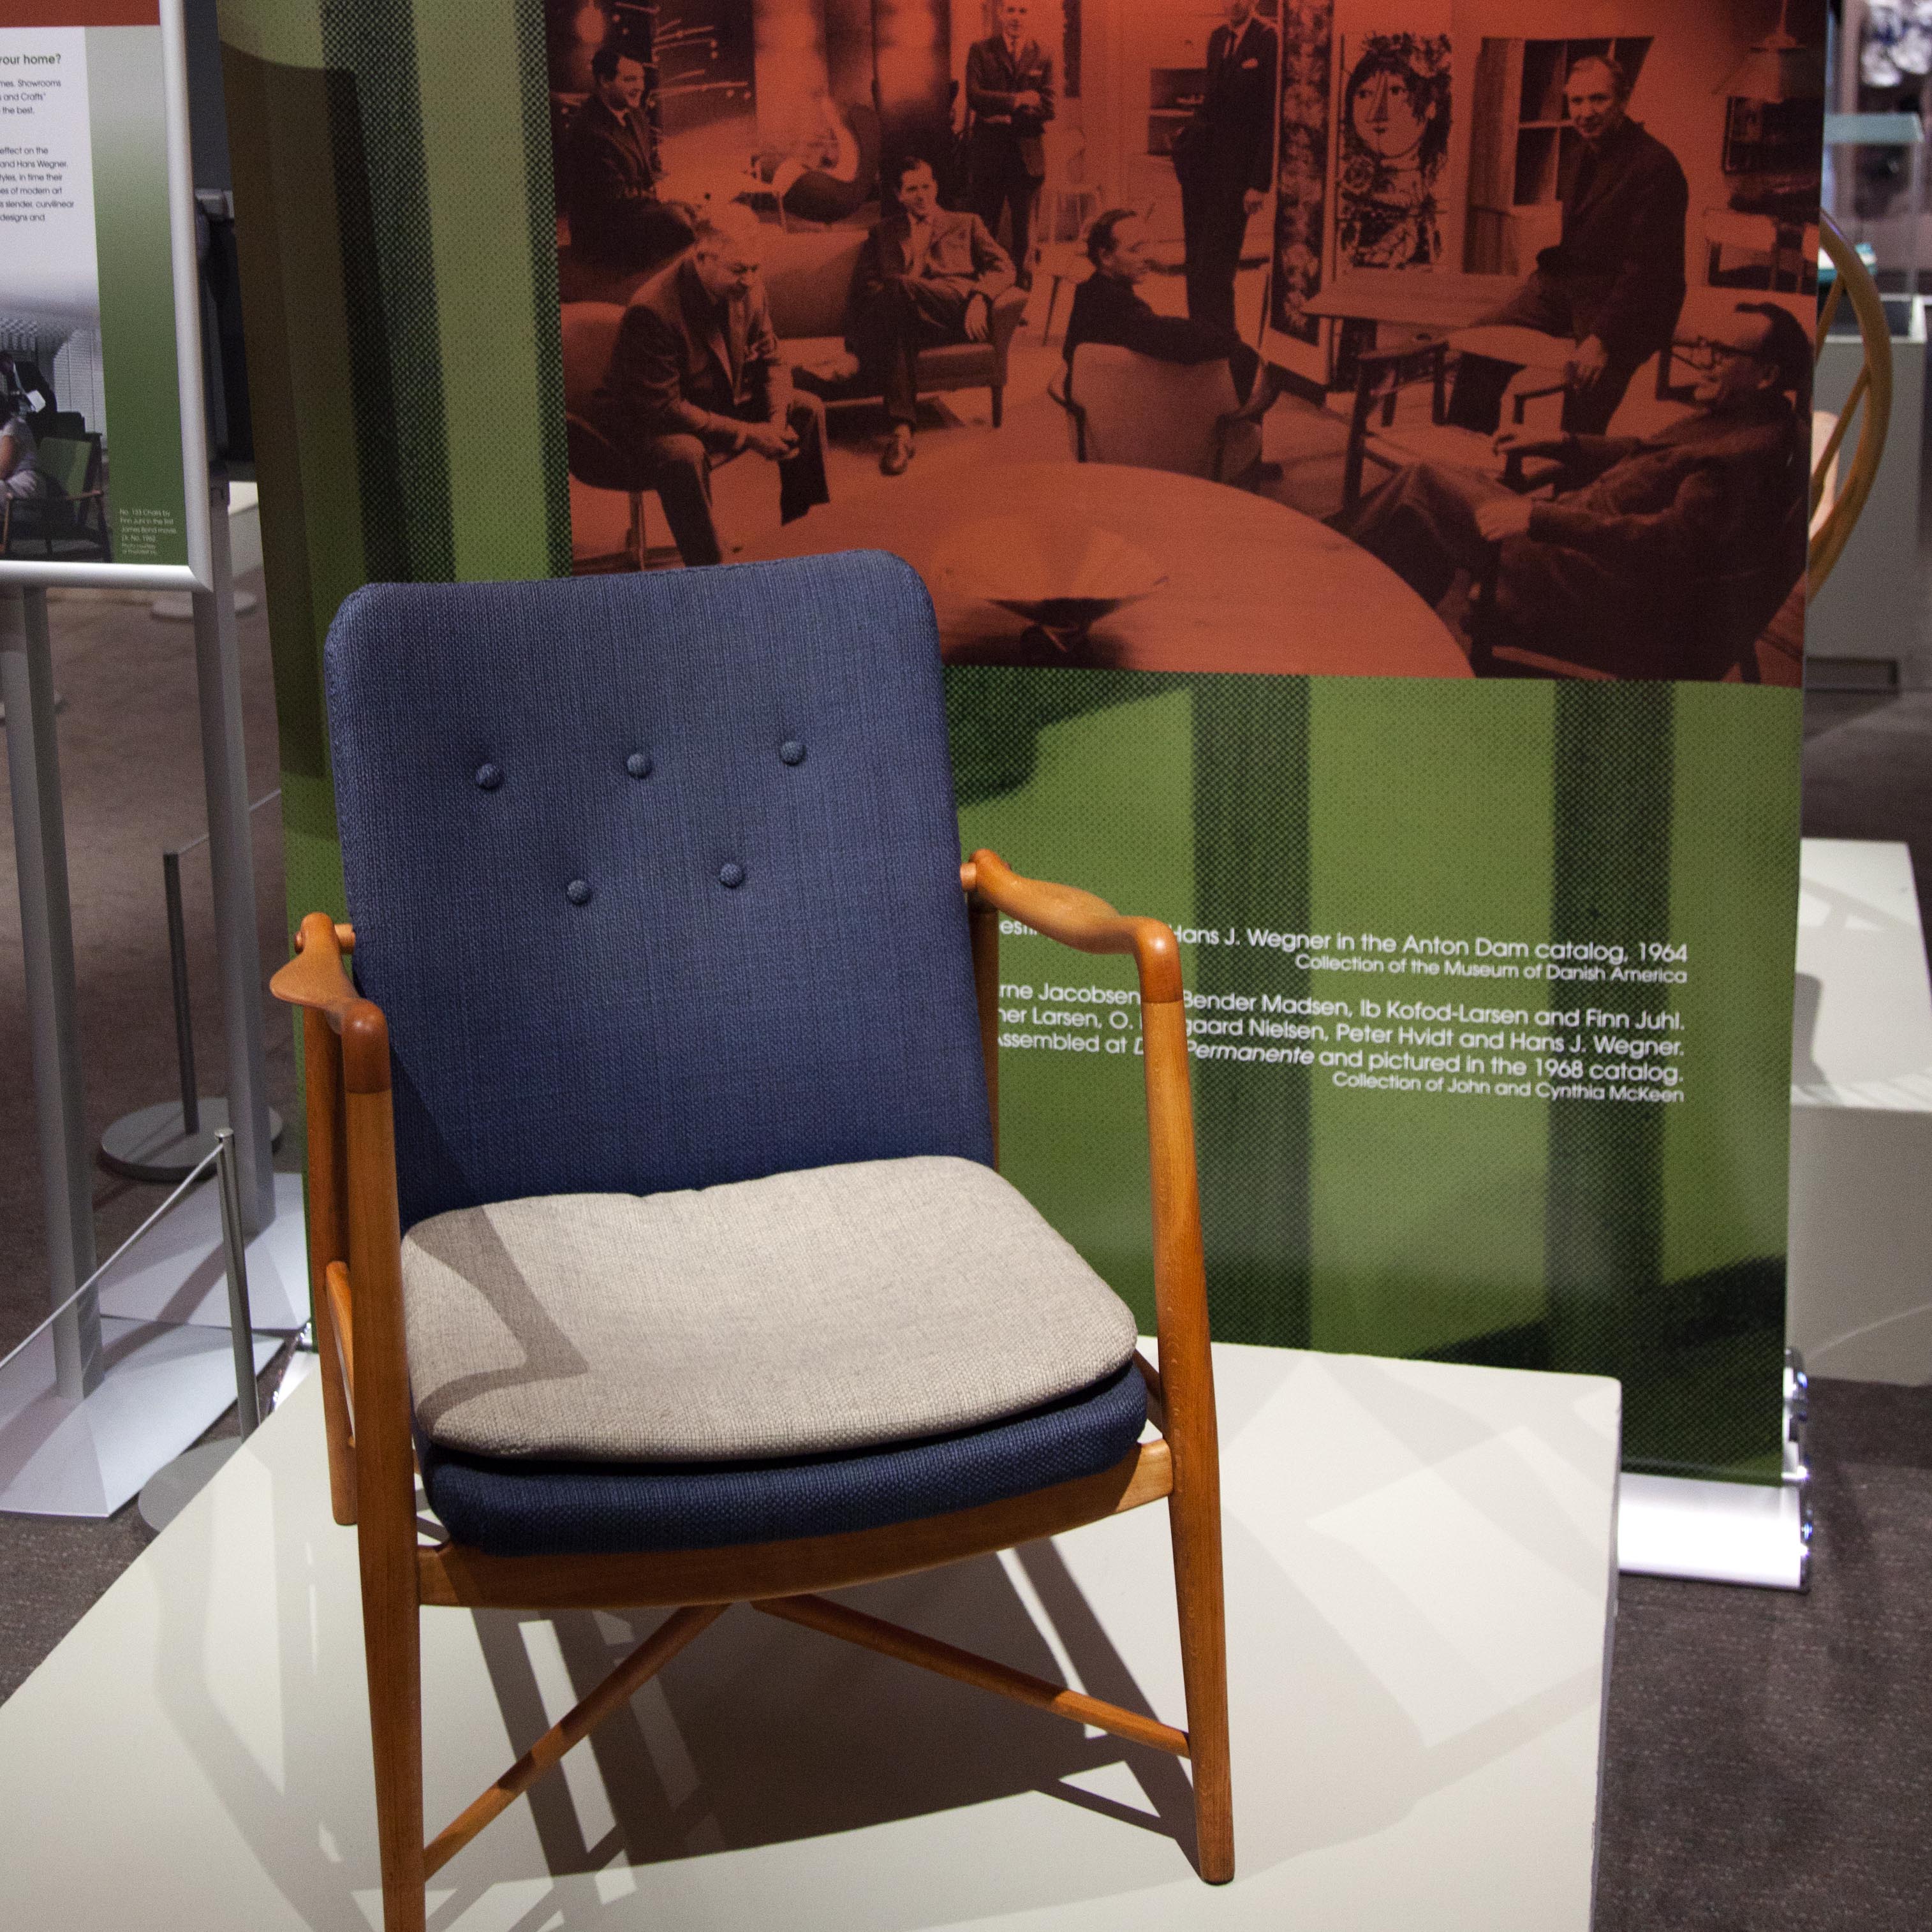 Danish Modern exhibition with chairs